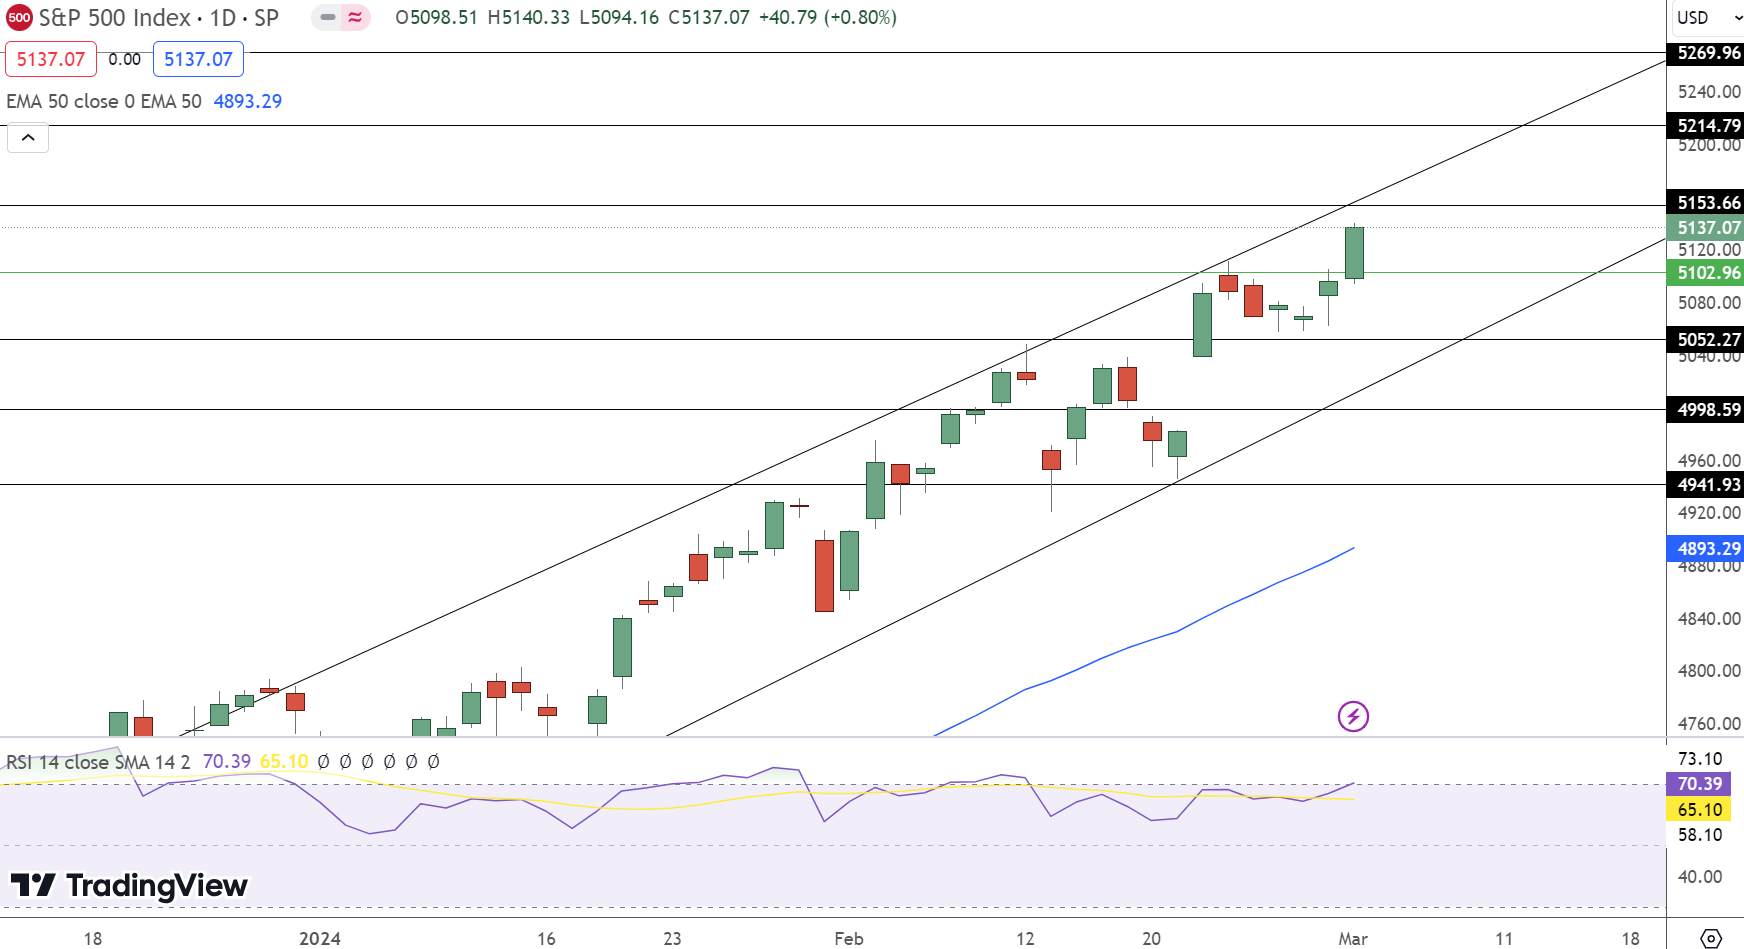 Weekly S&P500 Price Forecast: AI Surge & Earnings Calendar Set Stage